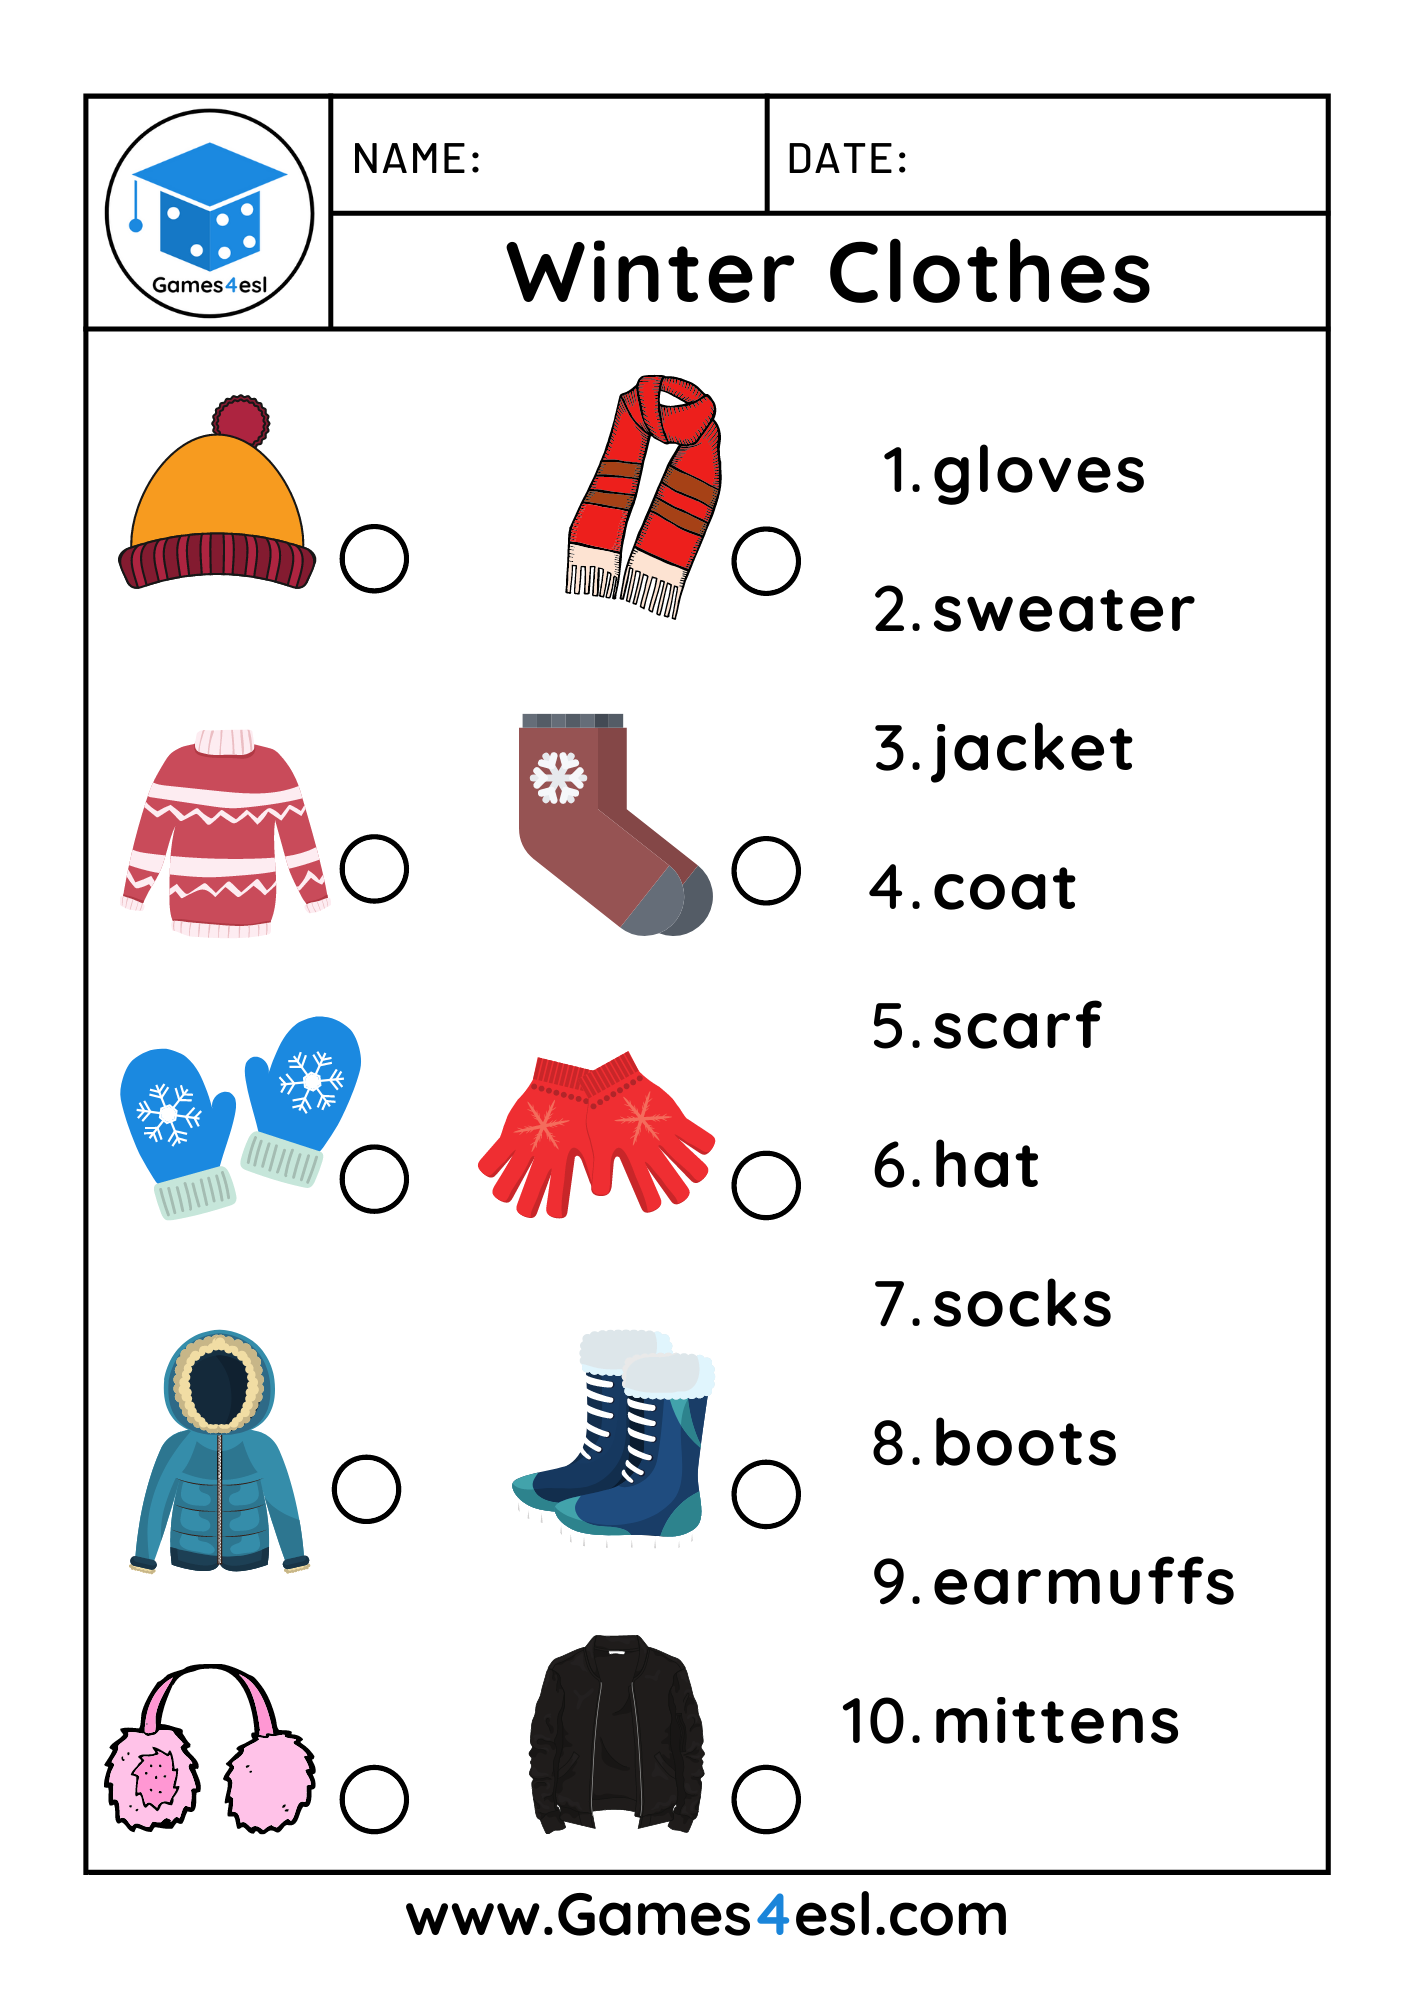 Clothes vocabulary for kids learning English